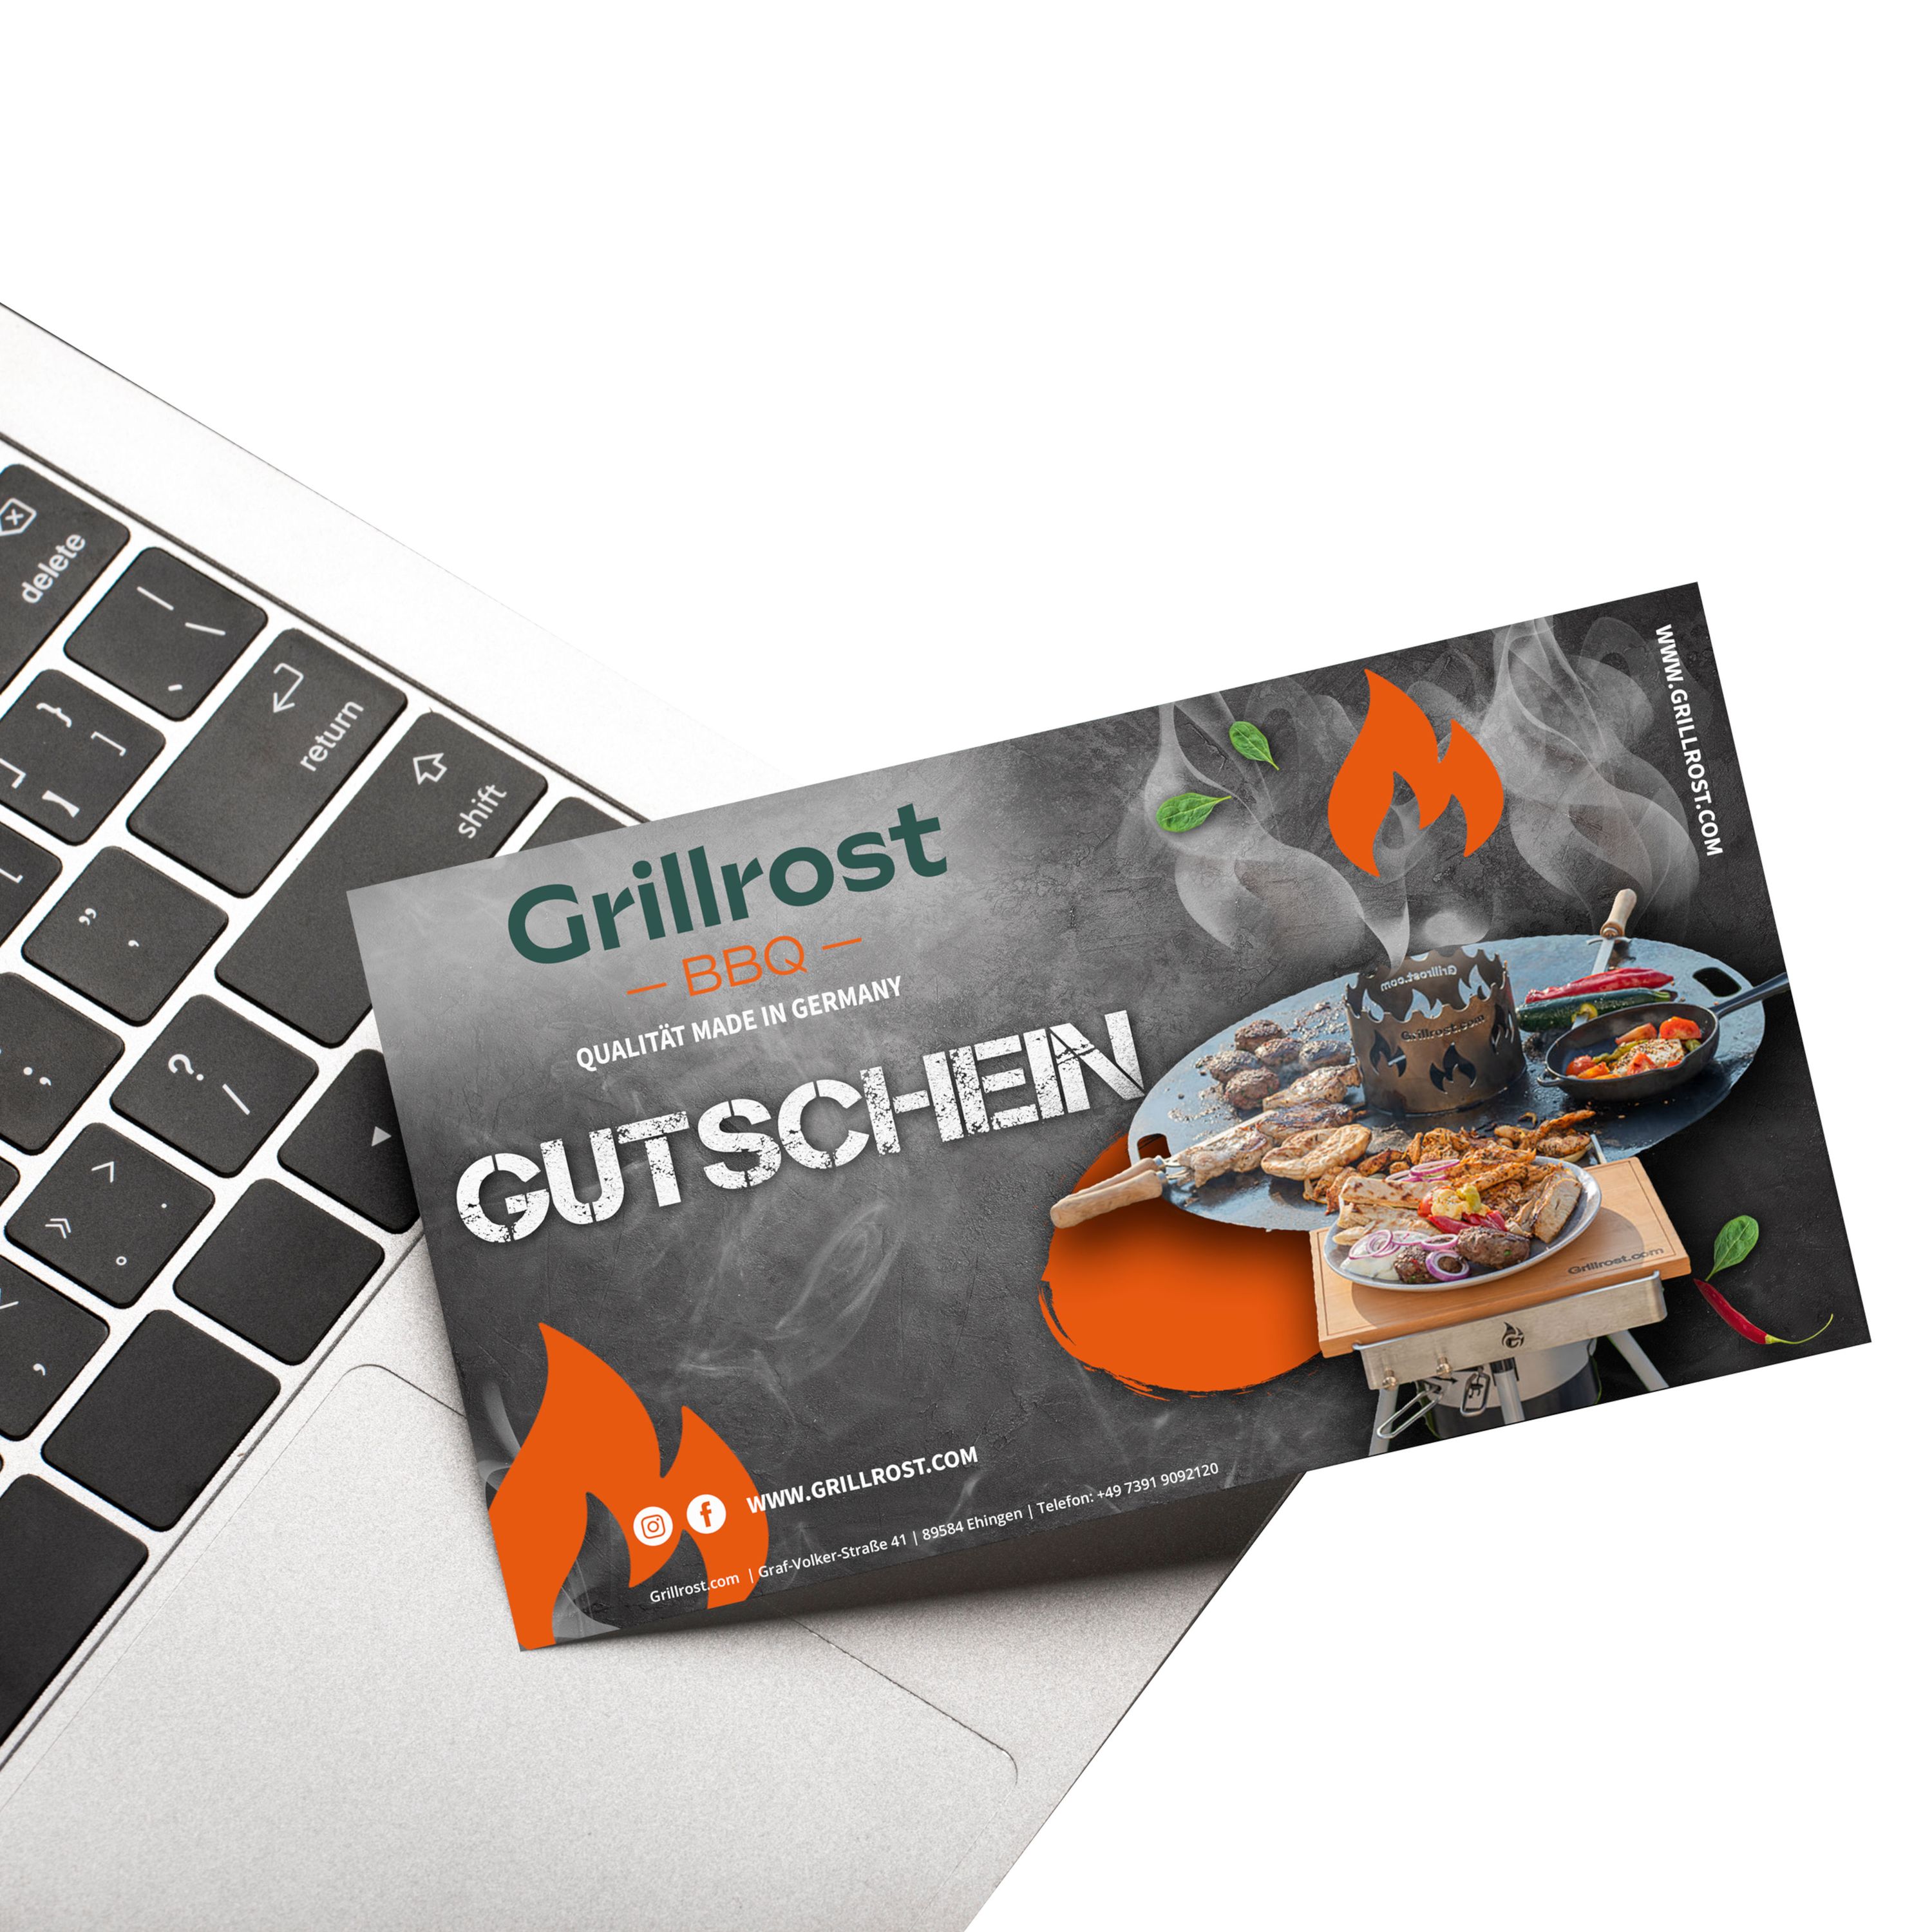 Coupon for Grillrost.com as PDF directly for printing